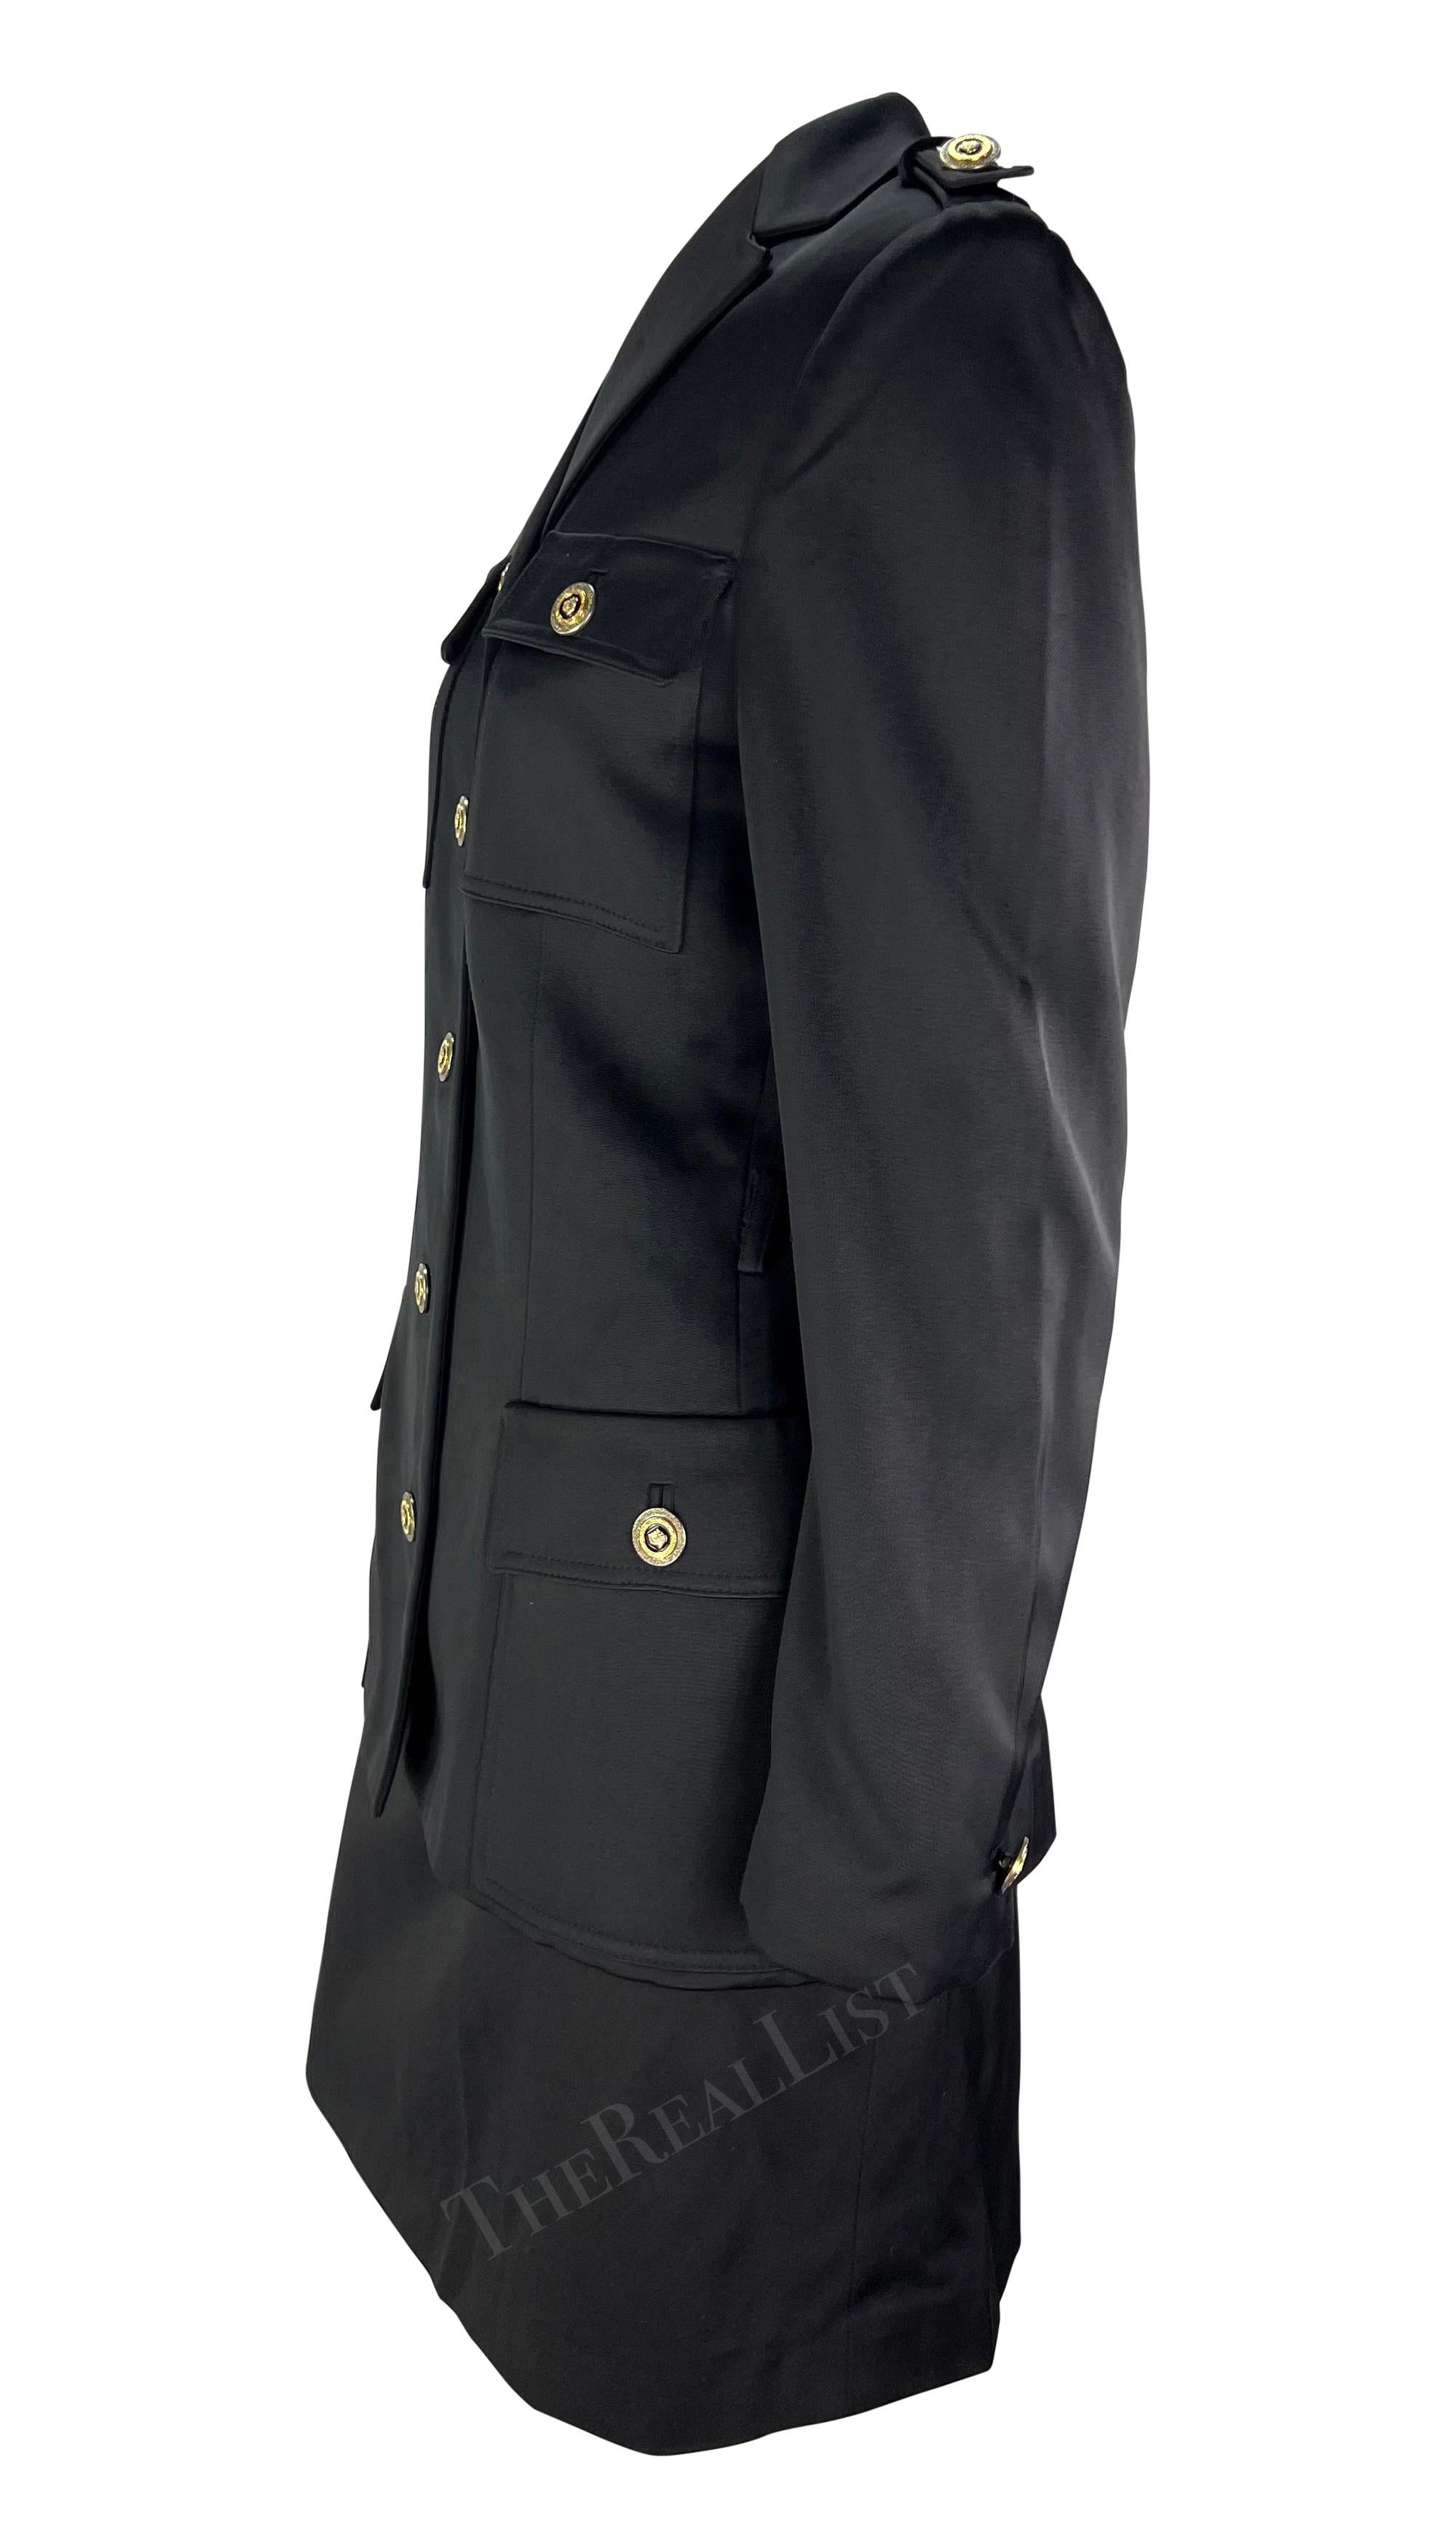 F/W 1996 Gianni Versace Black Military-Style Skirt Suit Set In Excellent Condition For Sale In West Hollywood, CA